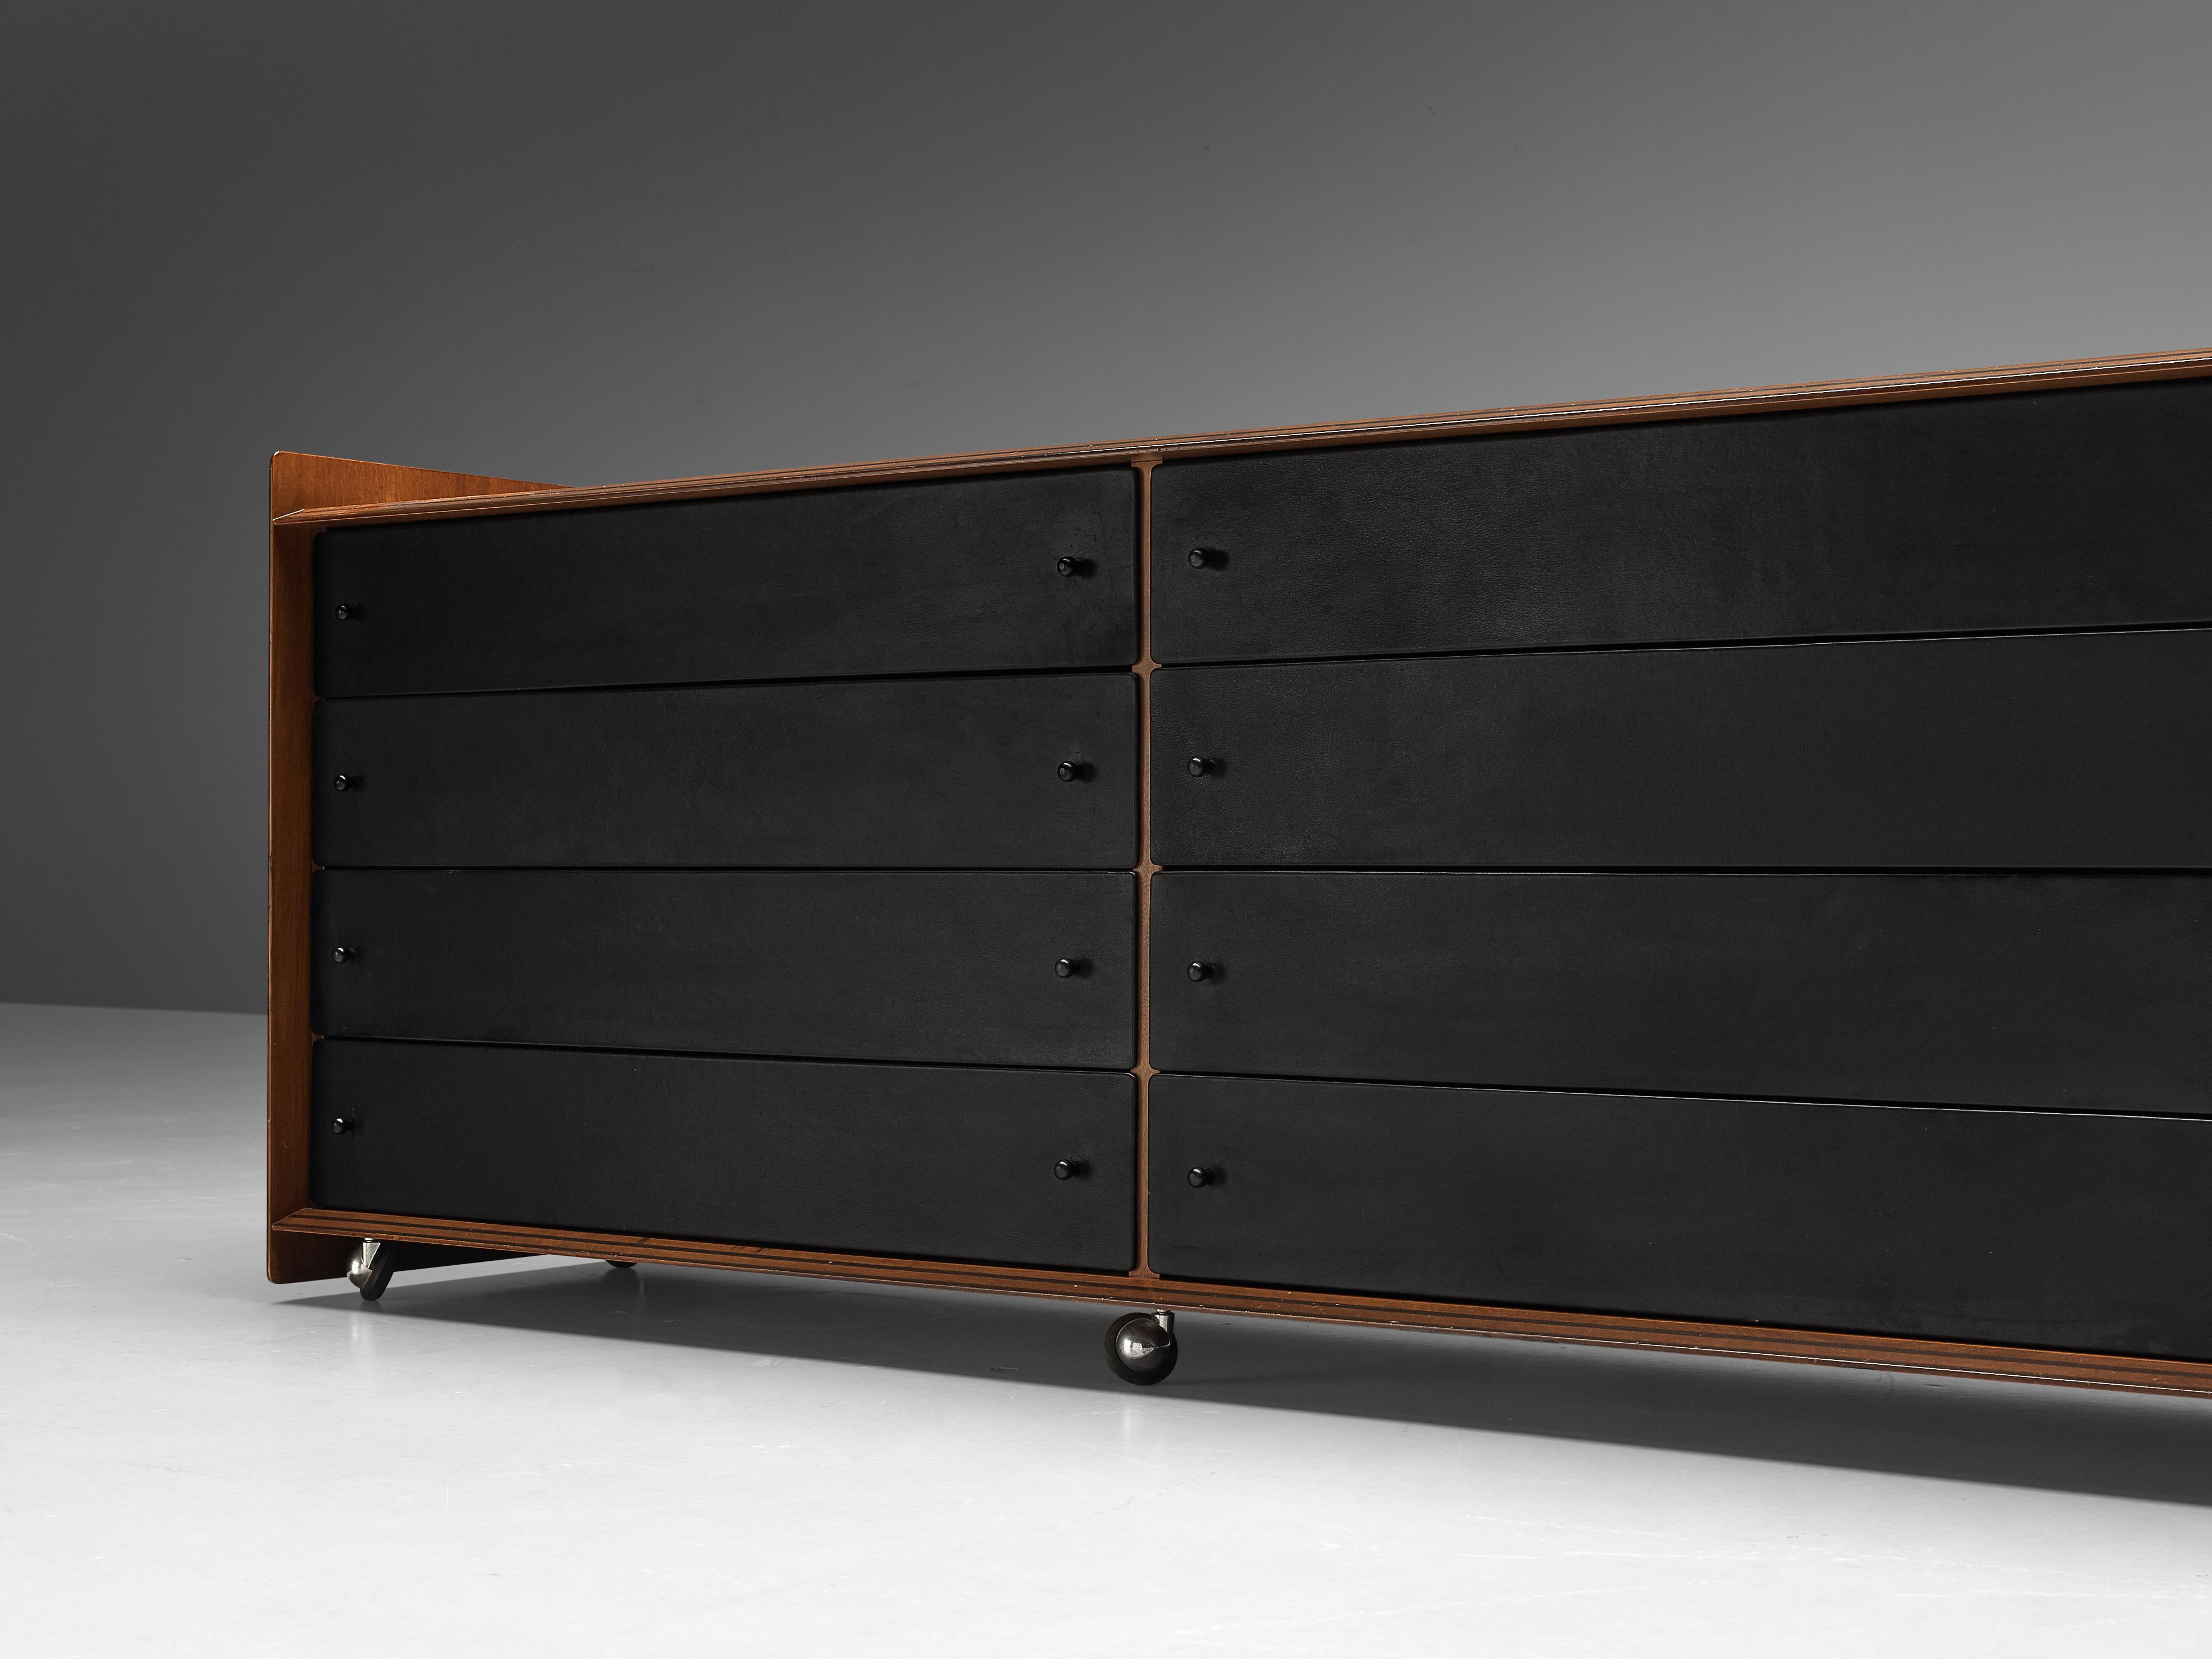 Afra & Tobia Scarpa 'Artona' Chest of Drawers in Black Leather and Walnut 1